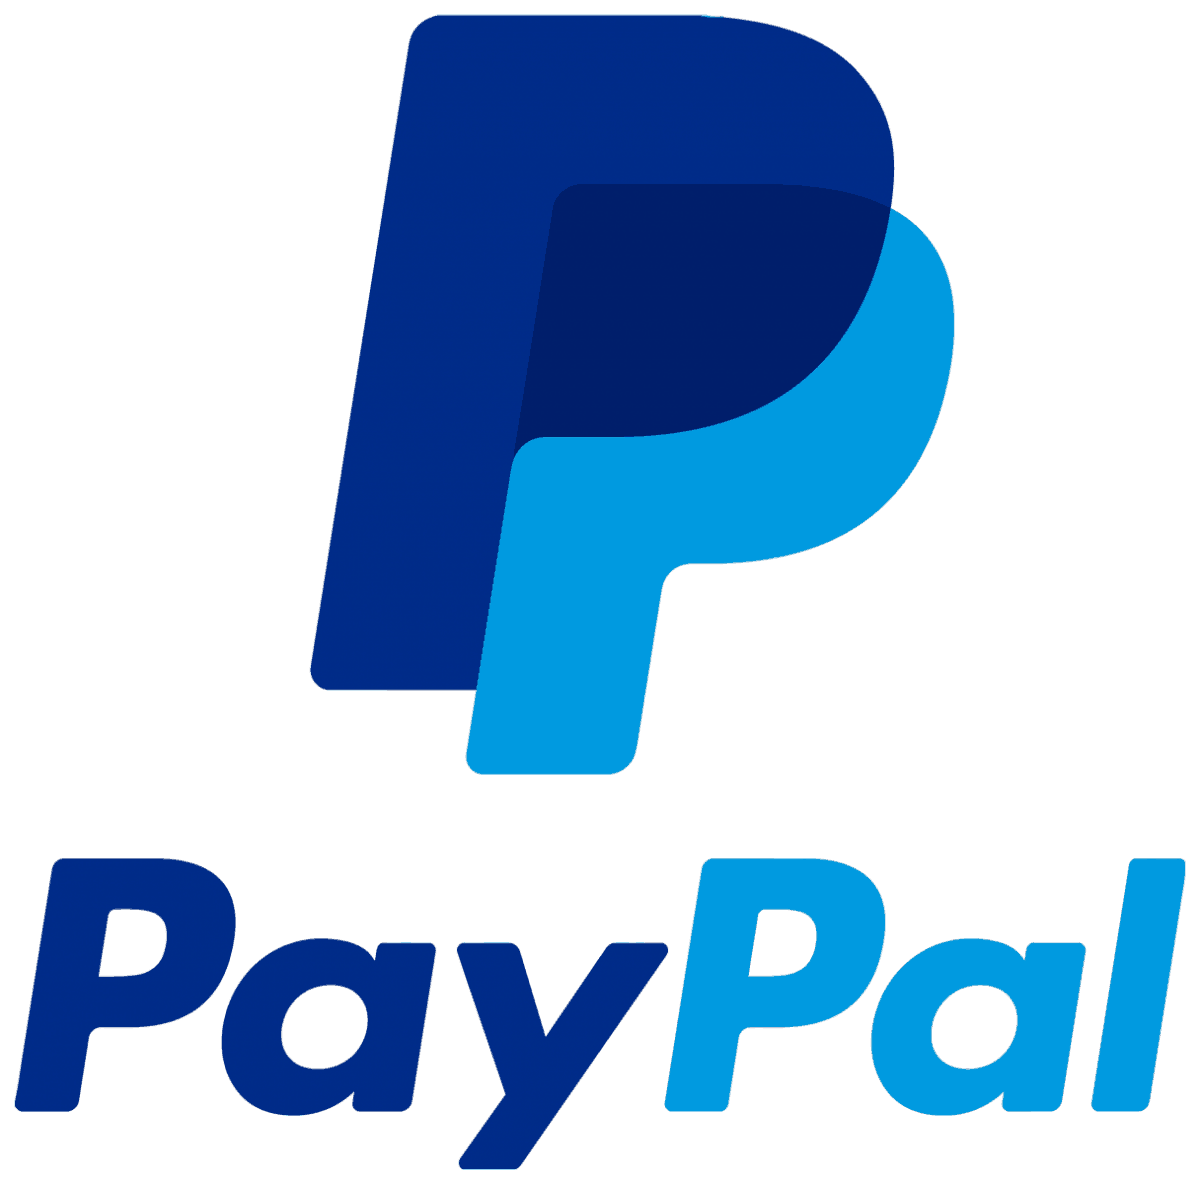 PayPal Background. PayPal Wallpaper, Wallpaper Credit Cards PayPal Accepted and PayPal All Hands Wallpaper